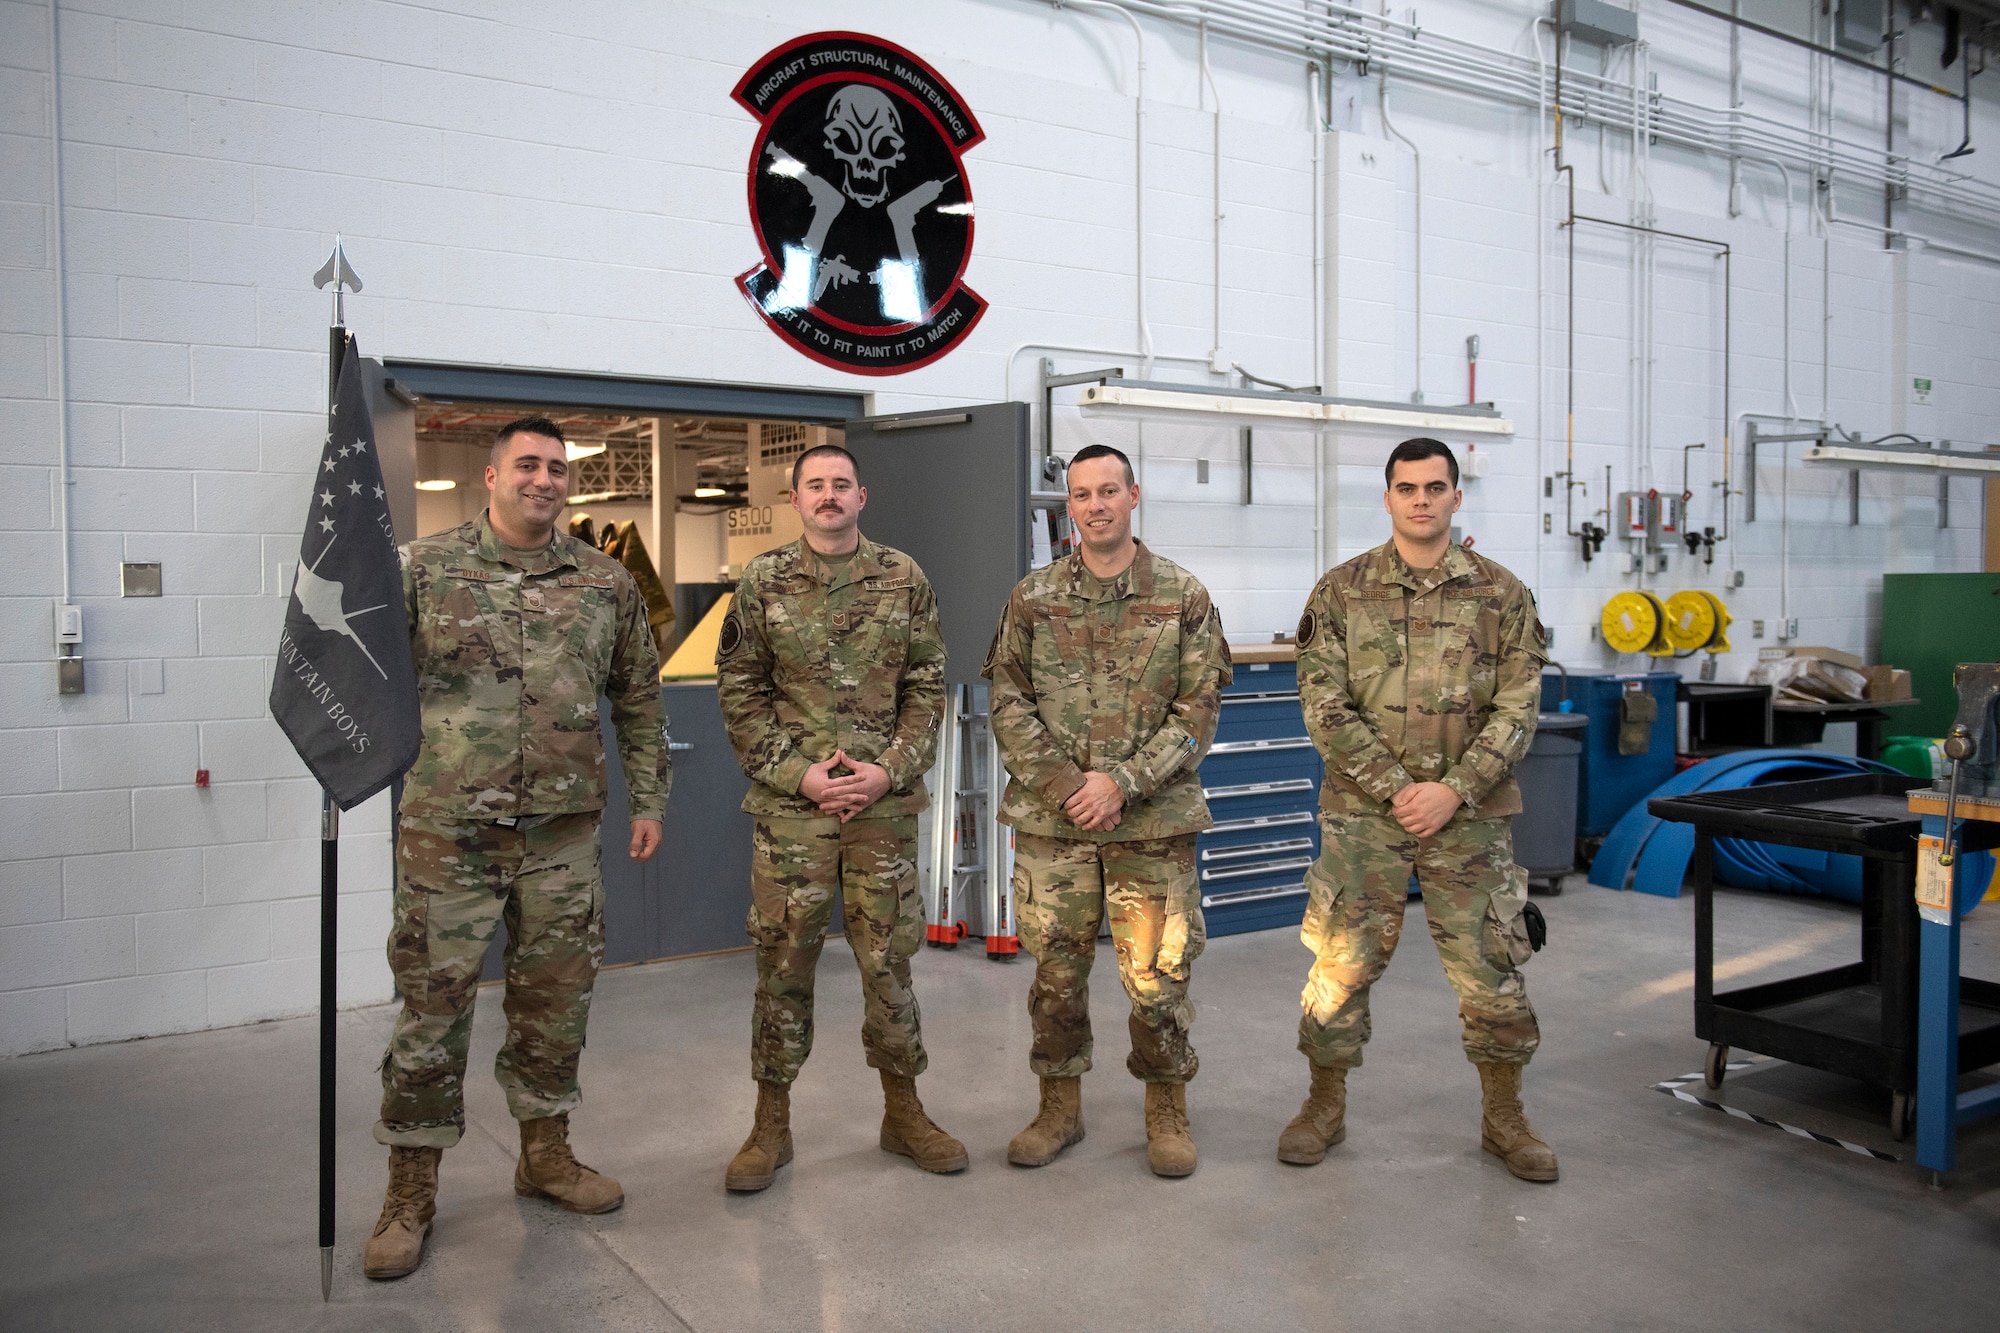 Master Sgt. Dykas, Tech. Sgt. Bohan, Master Sgt. Lamay and Tech Sgt. George, members assigned to the 158th Maintenance Group low observable shop, stand for a group portrait in their new building at the Vermont Air National Guard base.